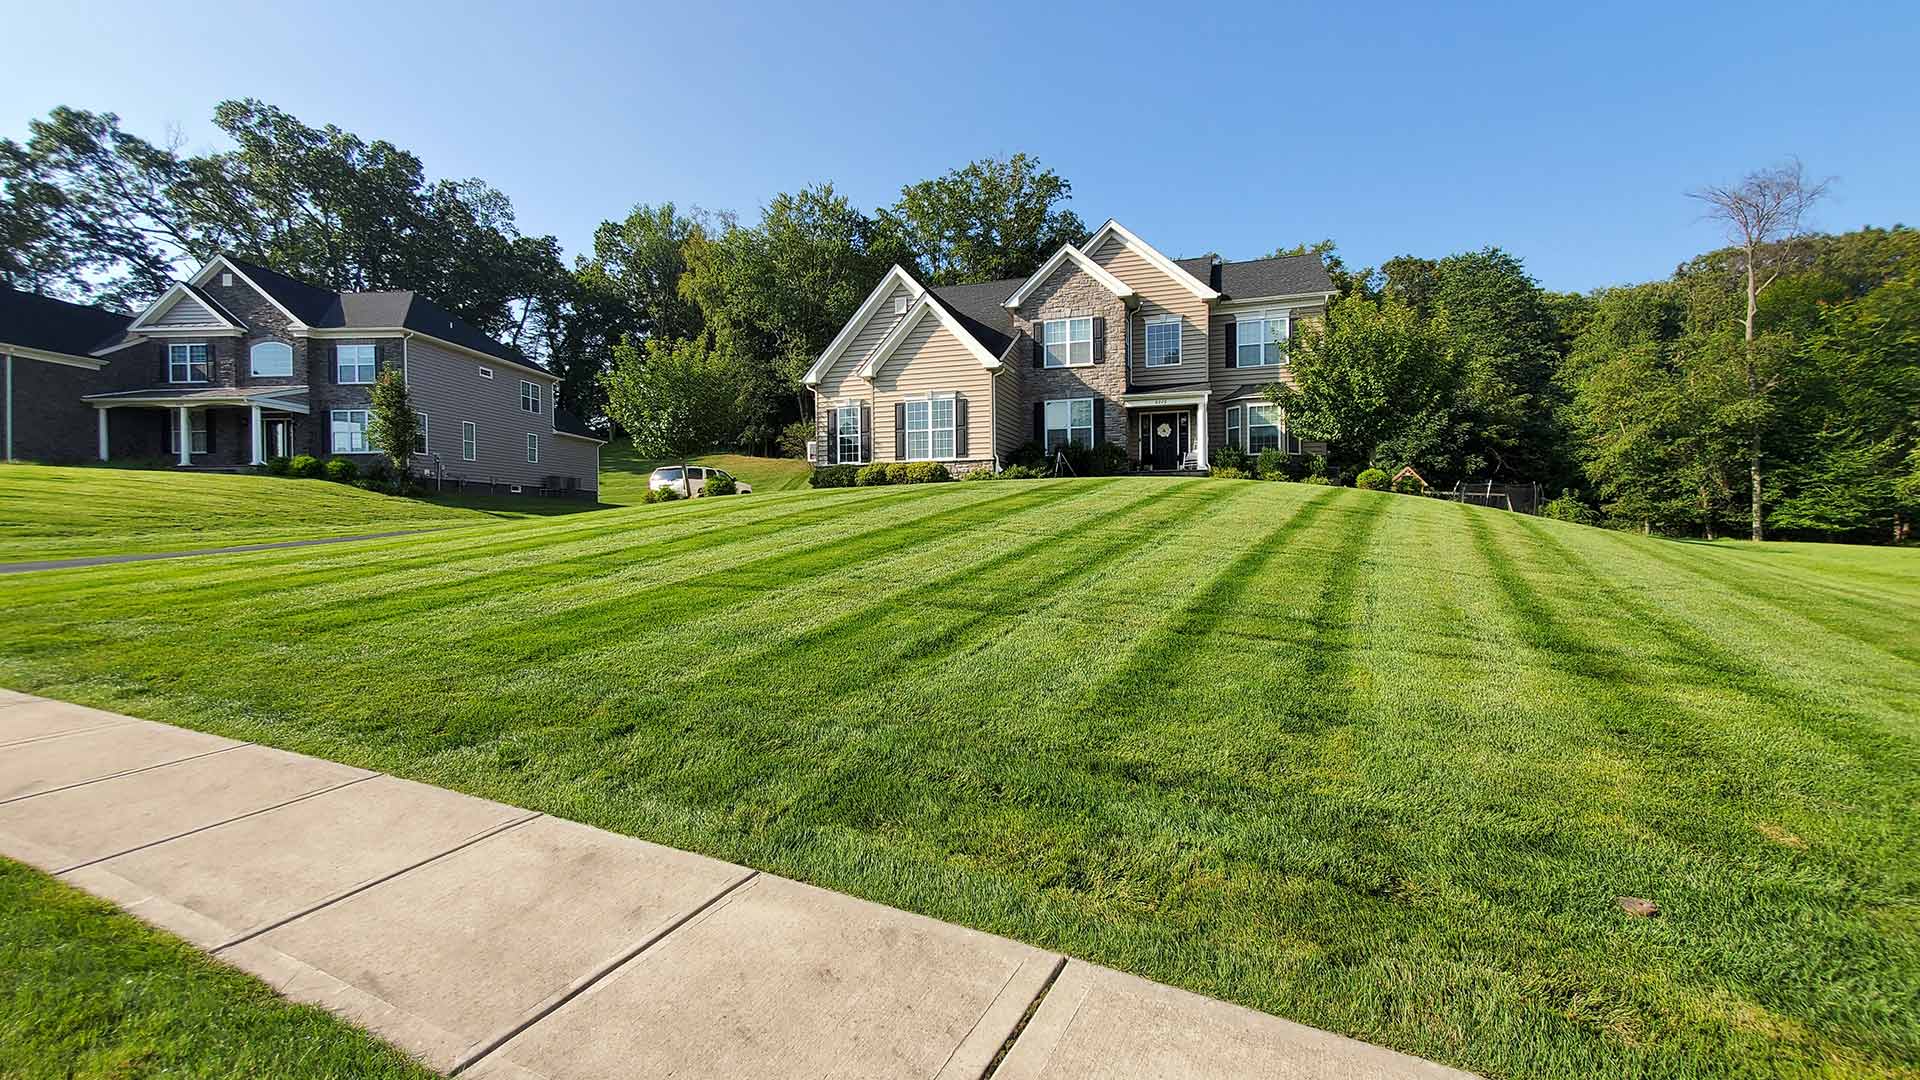 Recently mowed home lawn outside Macungie, PA.